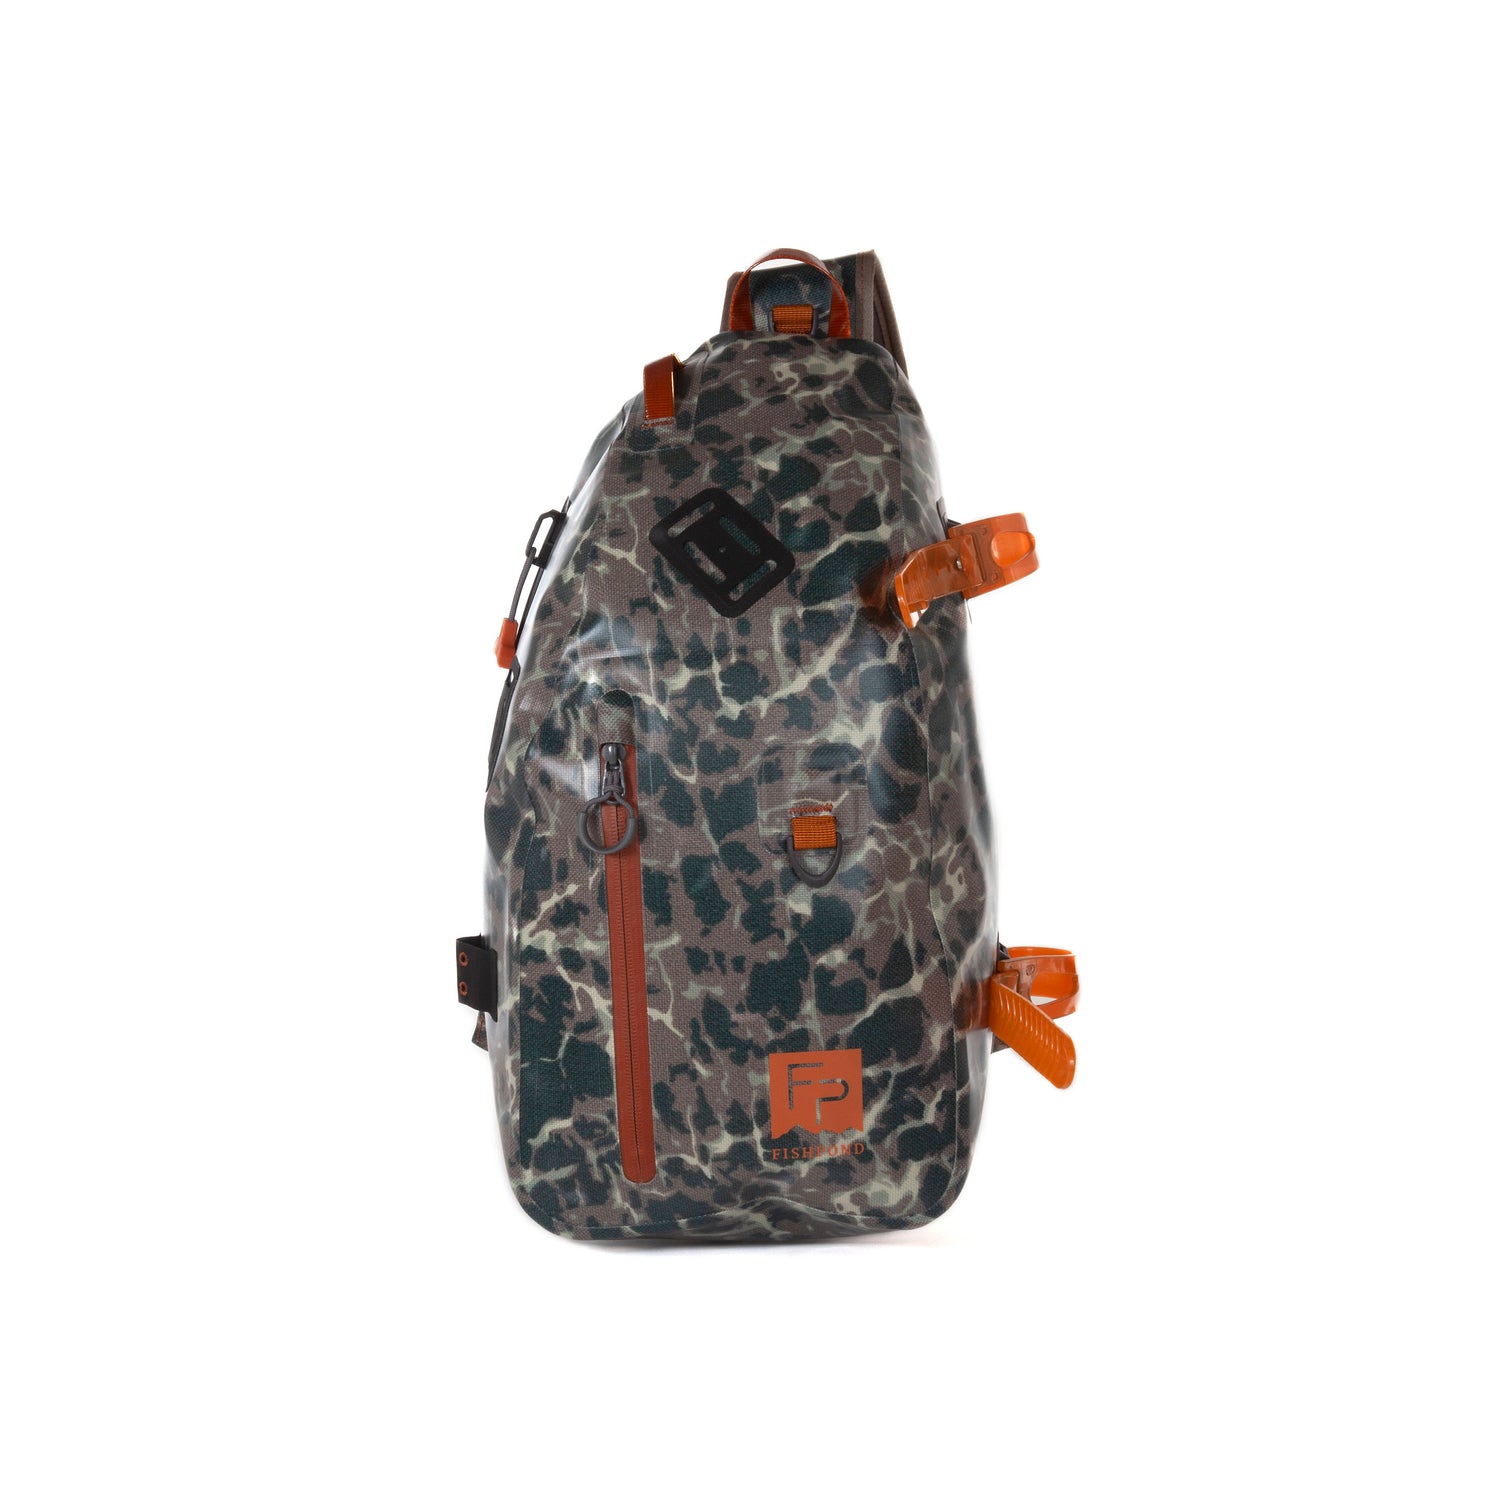 fishpond Thunderhead Submersible Waterproof Fly Fishing & Travel Backpack -  E for sale online